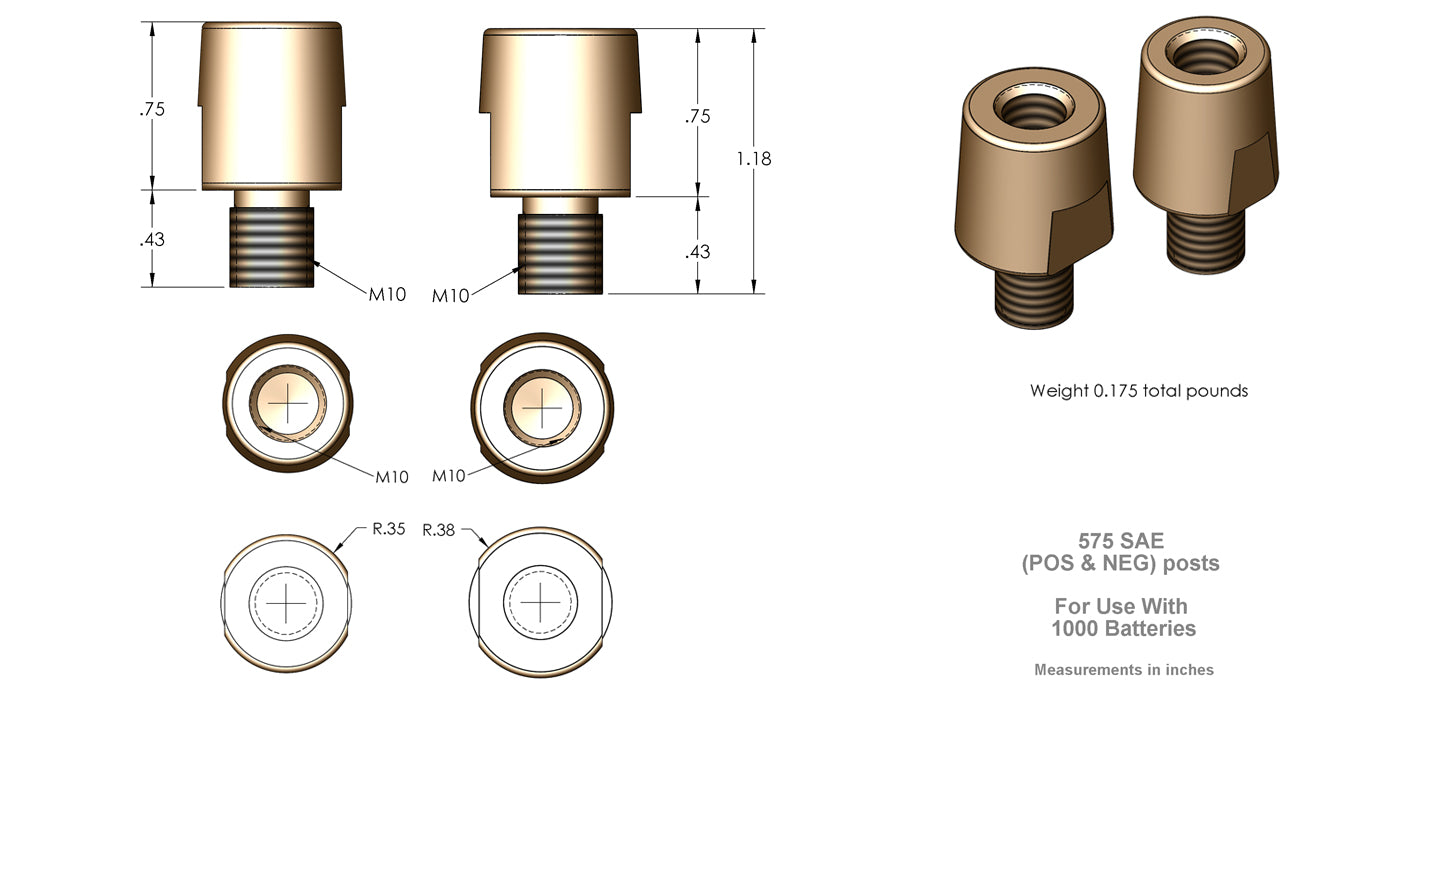 XS Power 575 XP1000 Brass Post Adaptors and Bolts M10 Threads